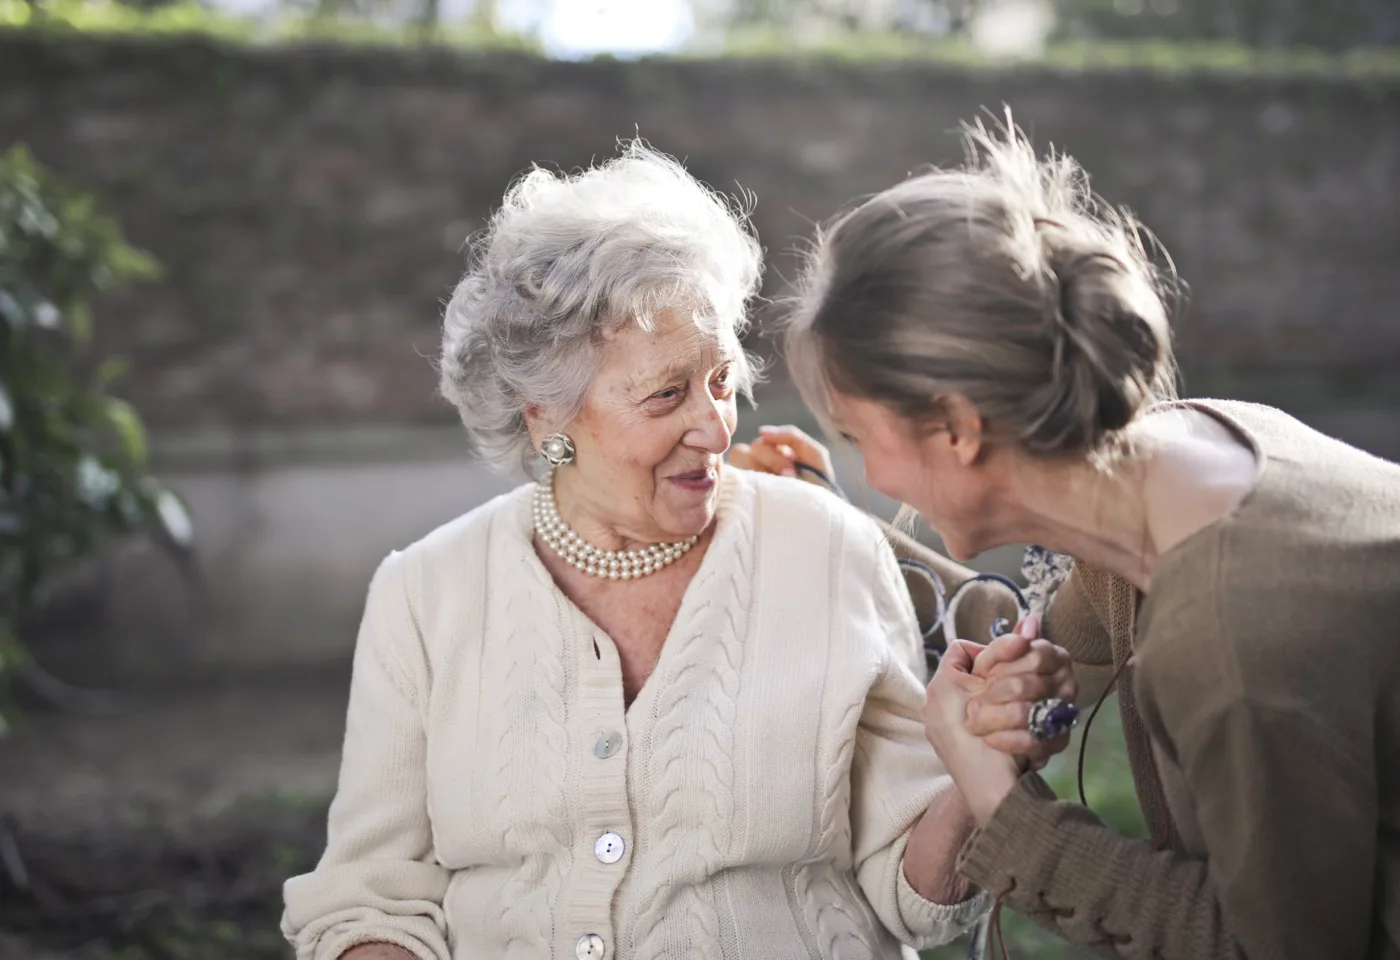 Seniors Can Live Their Best Lives With This Guide